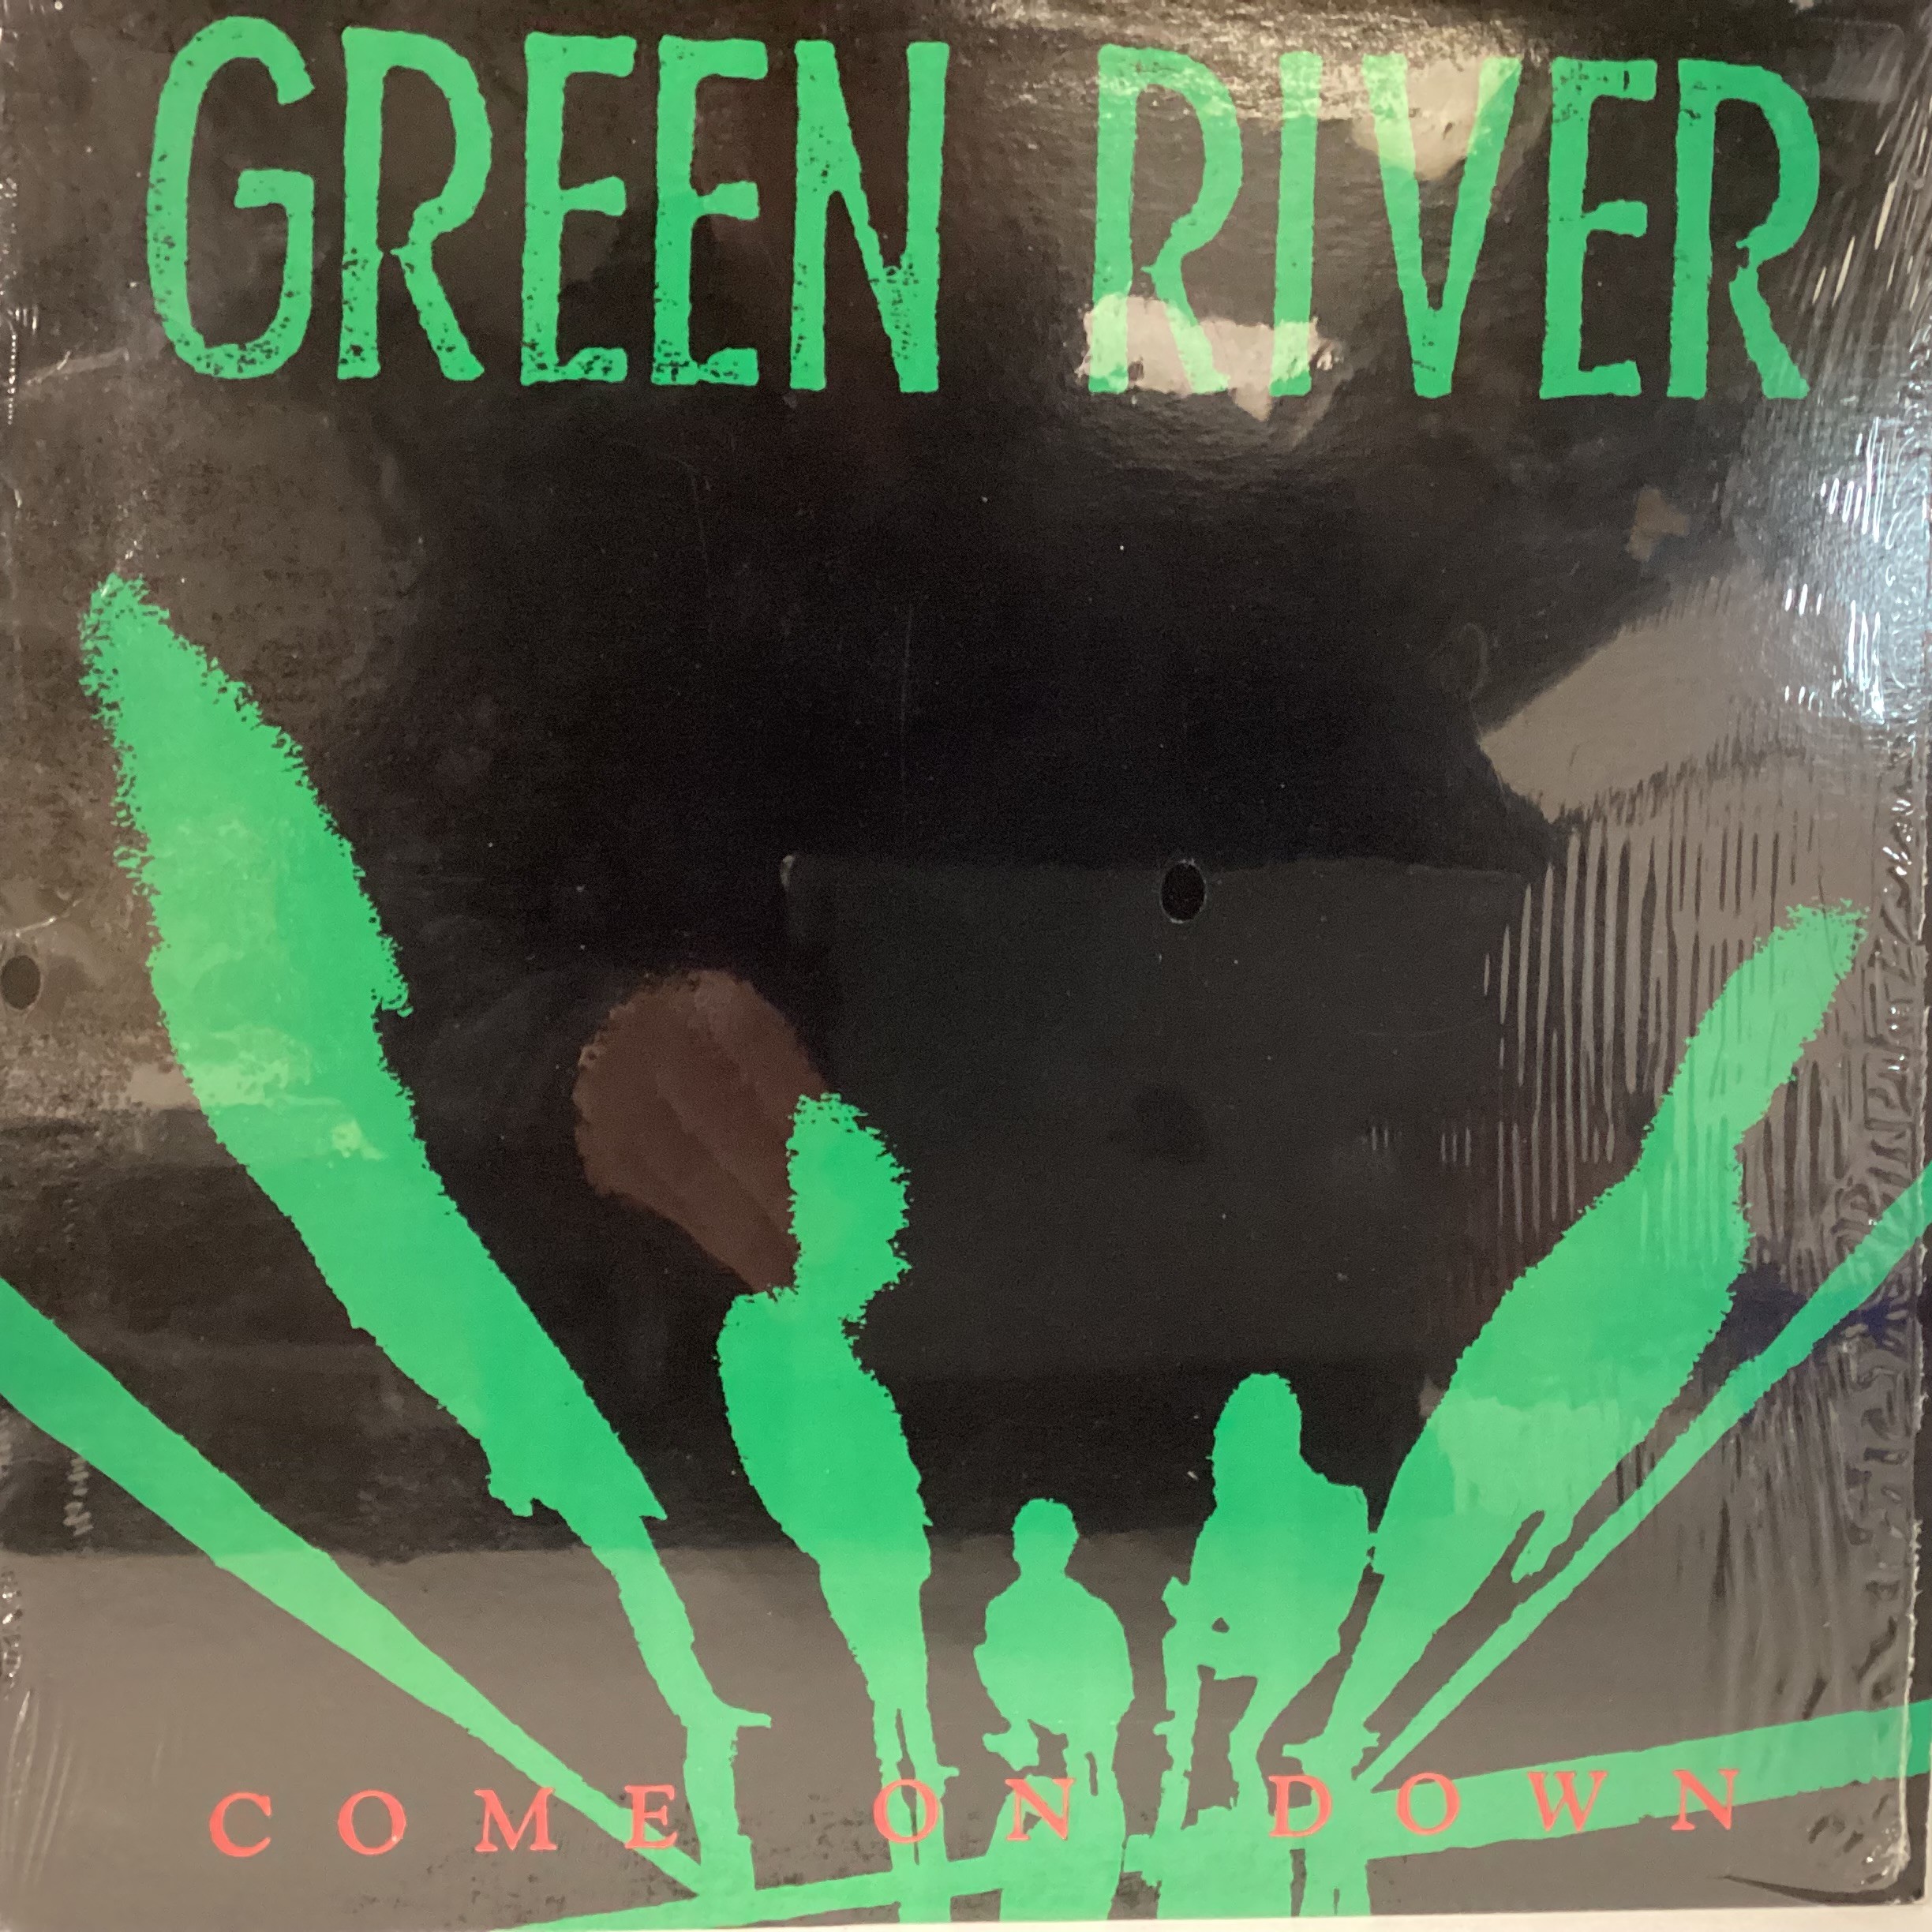 GREEN RIVER 'COME ON DOWN' VINYL LP. Ex condition vinyl here on Glitter House Records GR 0031